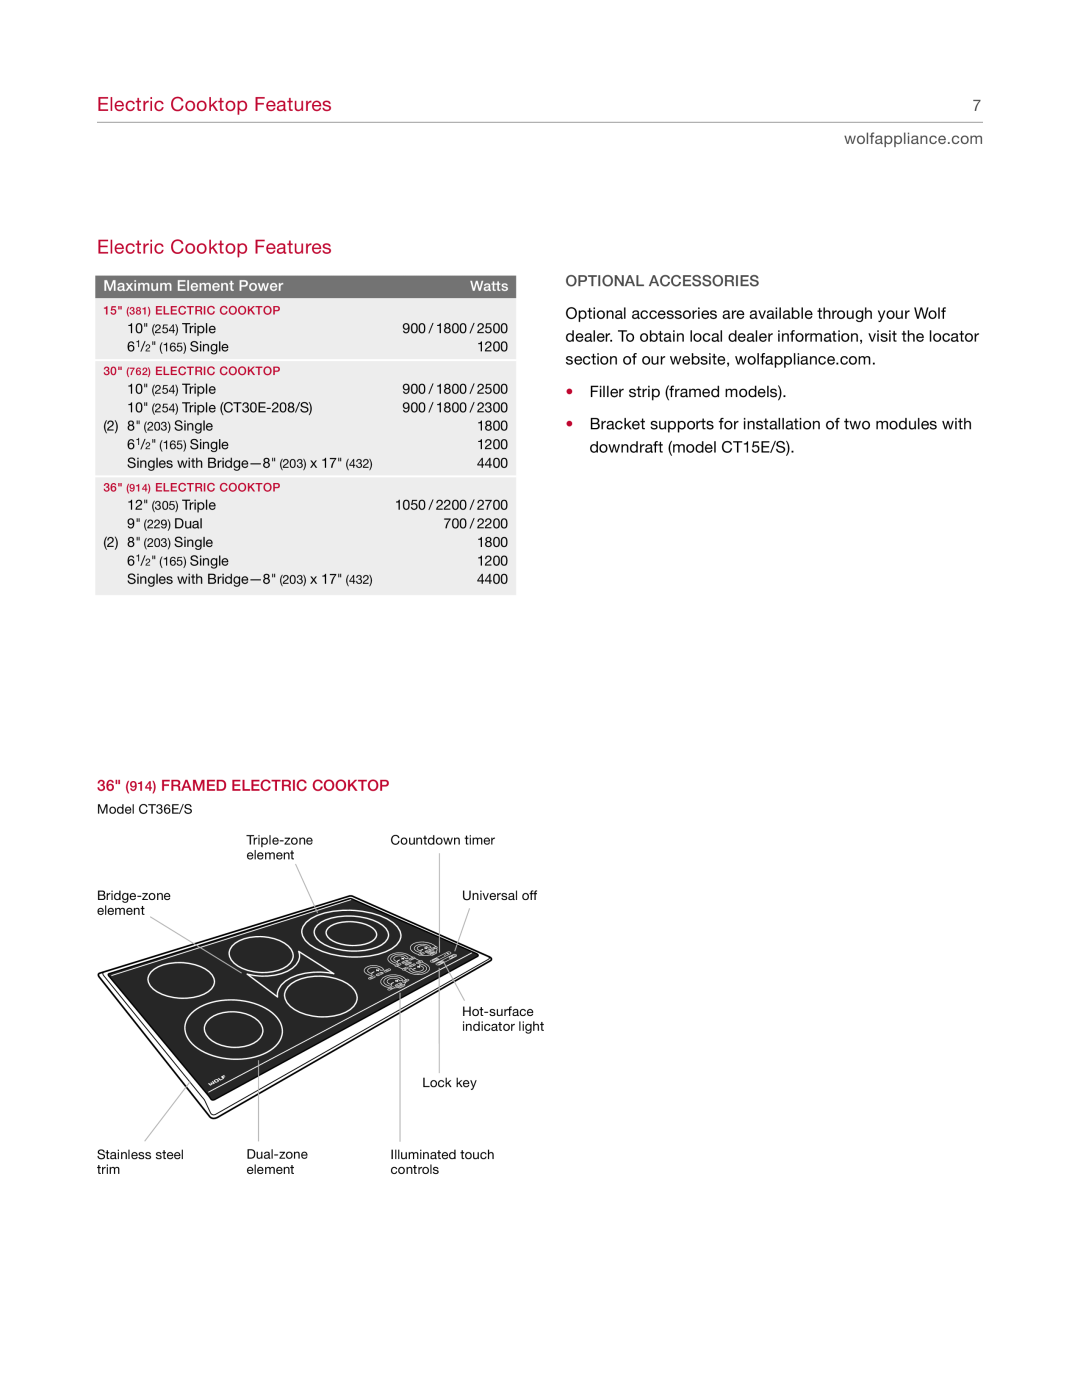 Wolf manual Electric Cooktop Features, wolfappliance.com, 36 914 FRAMED ELECTRIC COOKTOP, Optional Accessories 